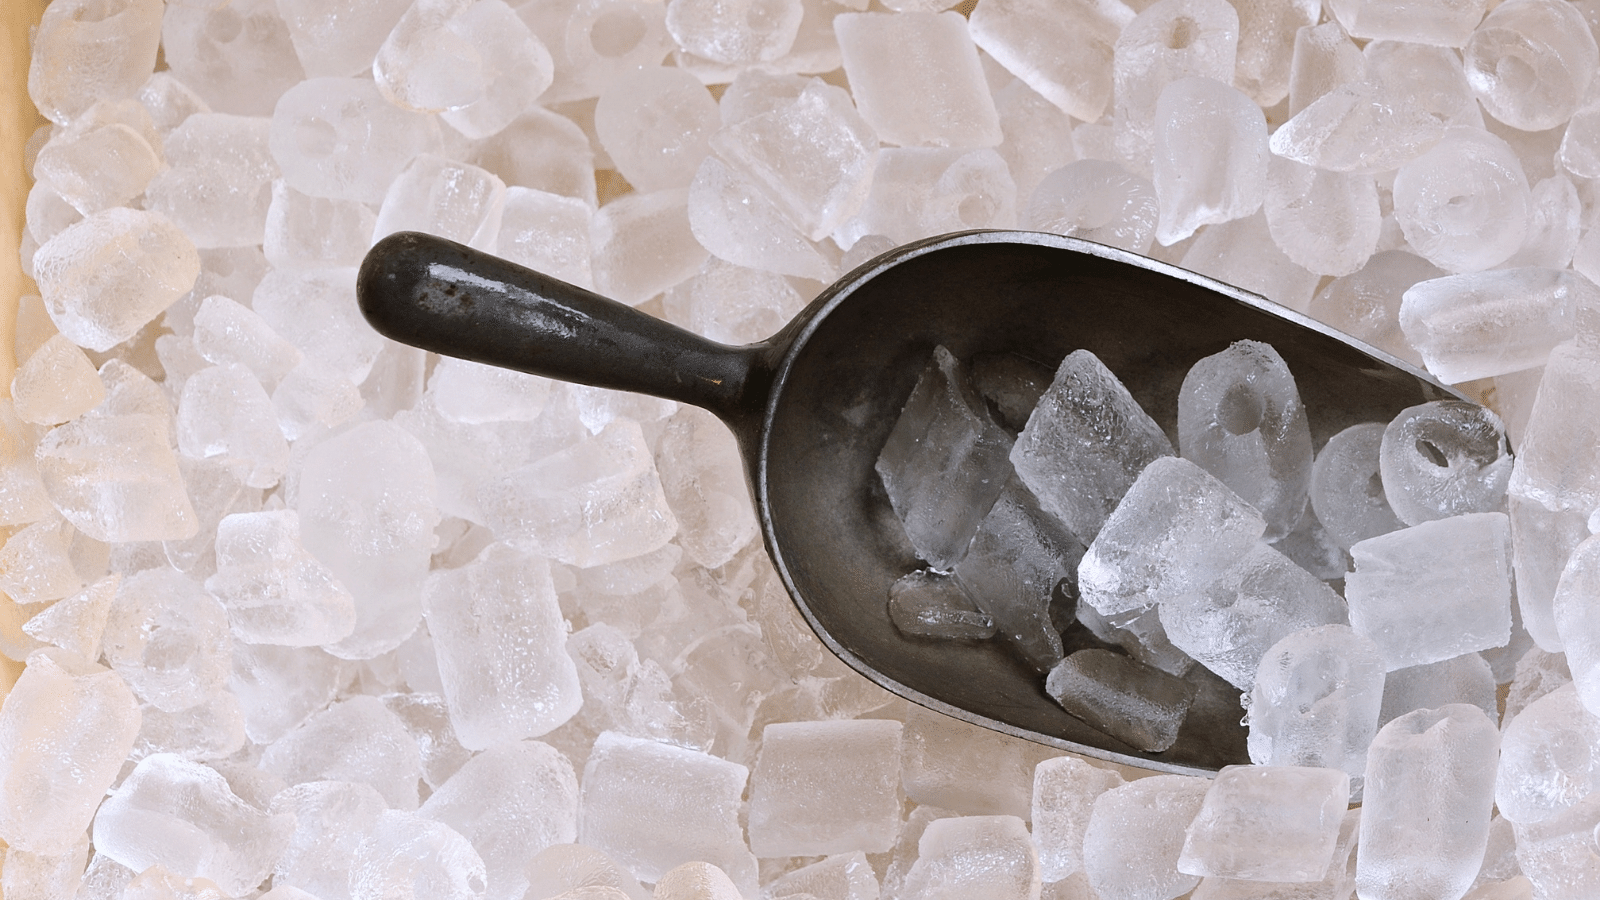 Why Nugget Ice Is So Soft and Chewable, According to Science